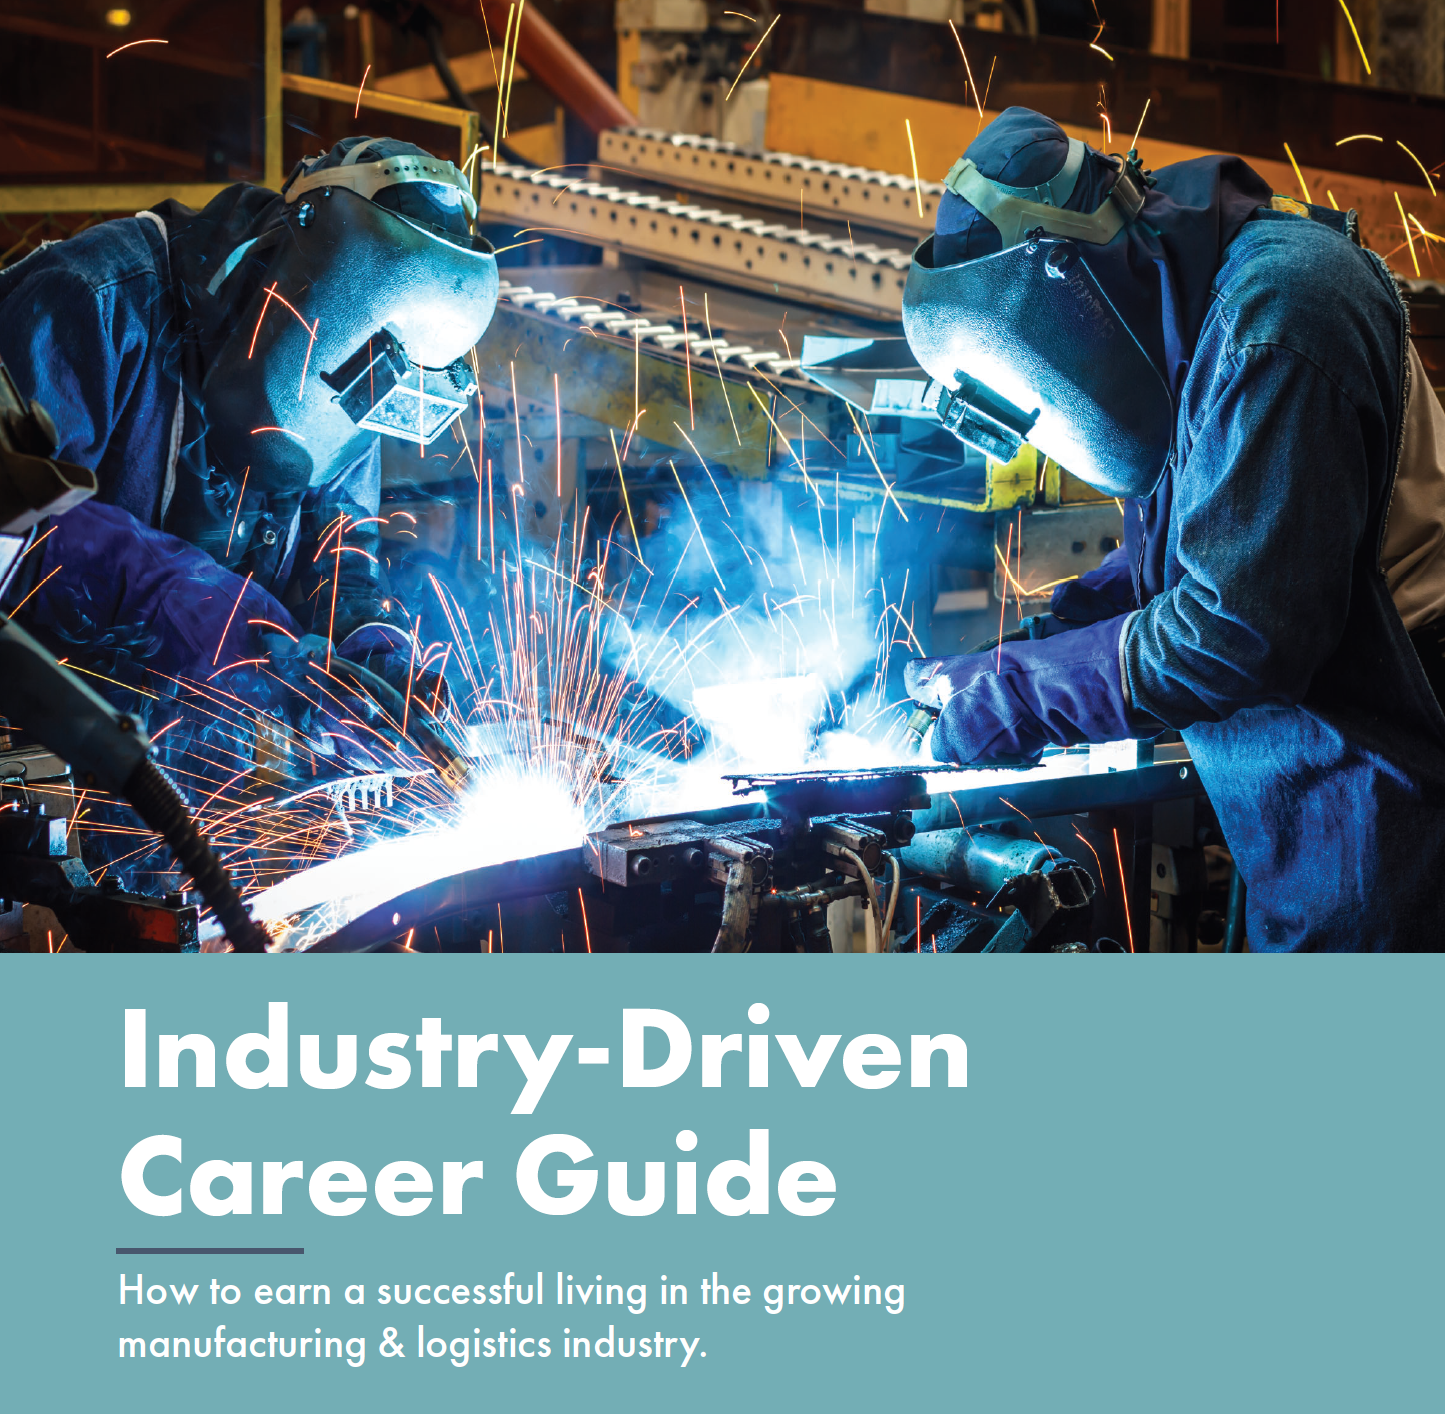 Click the Industry Career Guide Produced Locally to Meet Manufacturing Workforce Needs Slide Photo to Open